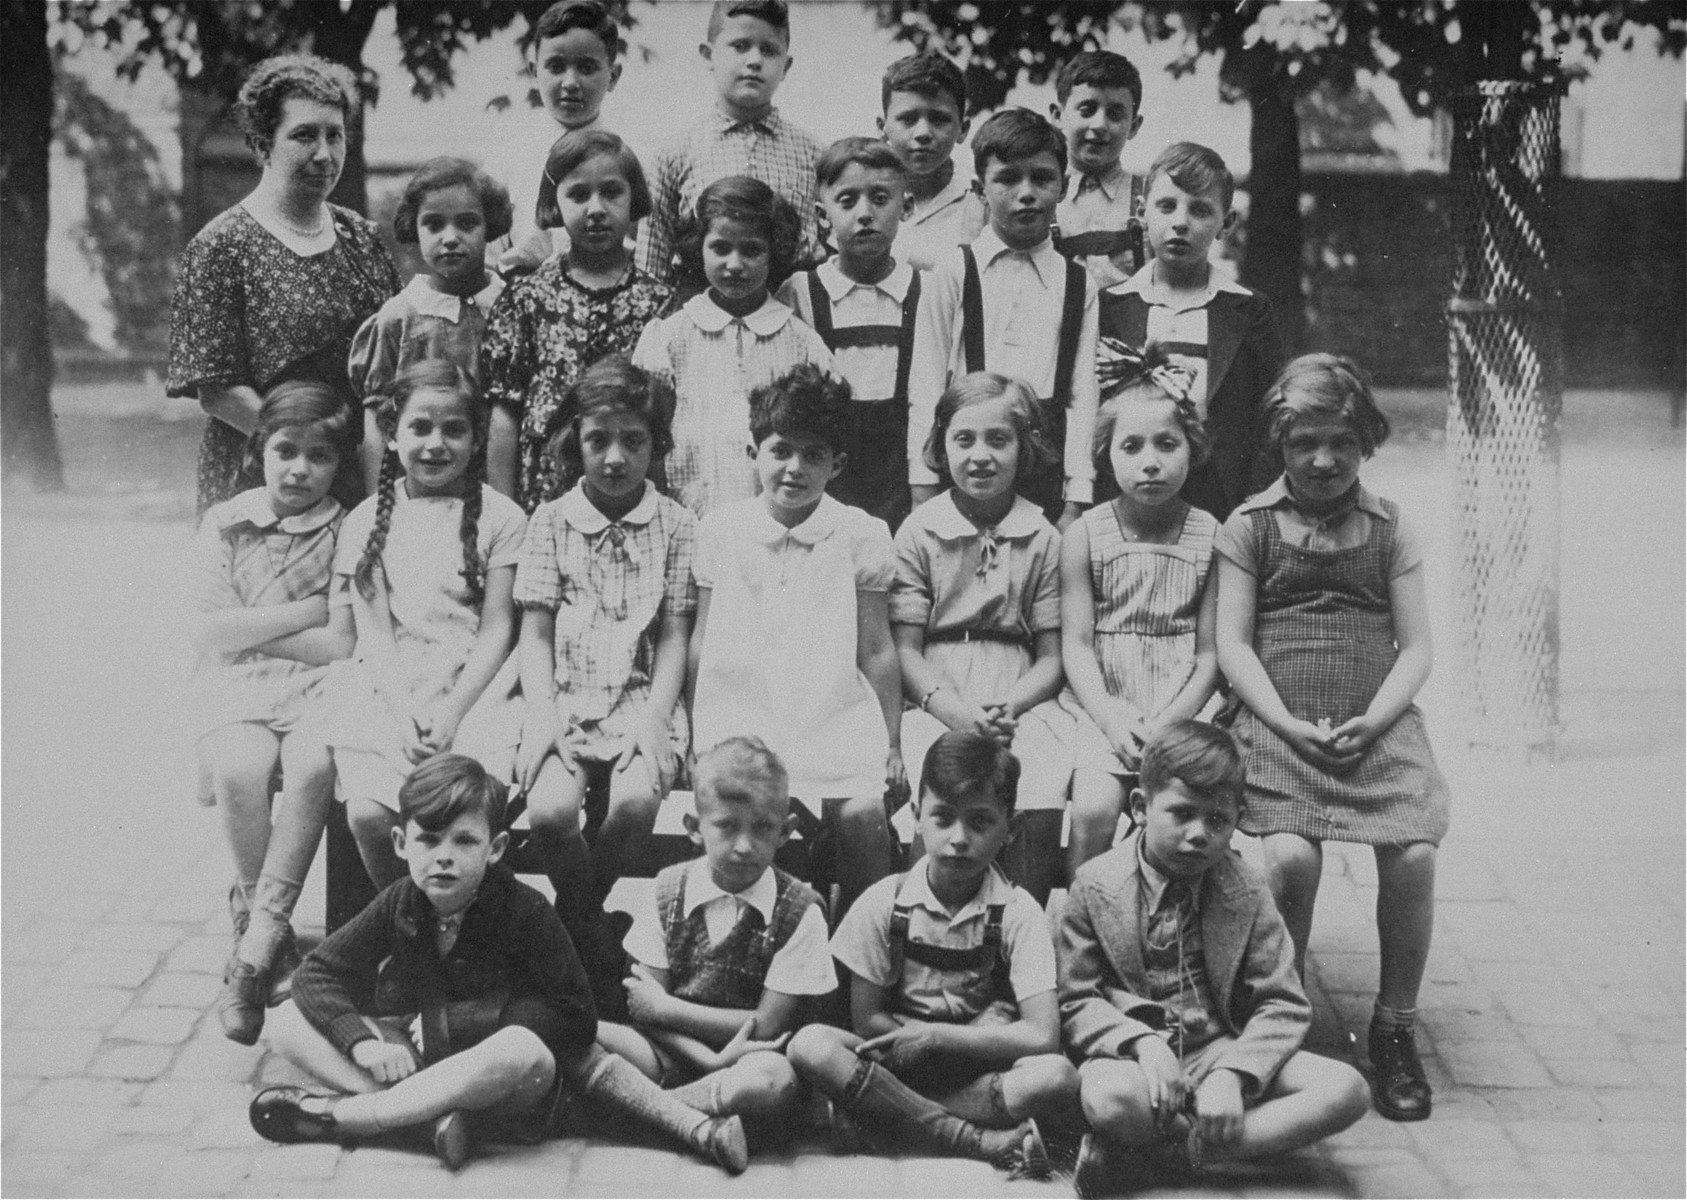 Group portrait of pupils in the first grade at a Jewish school in Karlsruhe, Germany that had been relocated to one floor at the 'Holzbodengymnasium' a special school for mentally disabled children. 

Among those pictured is the teacher, Flora Hirsch.